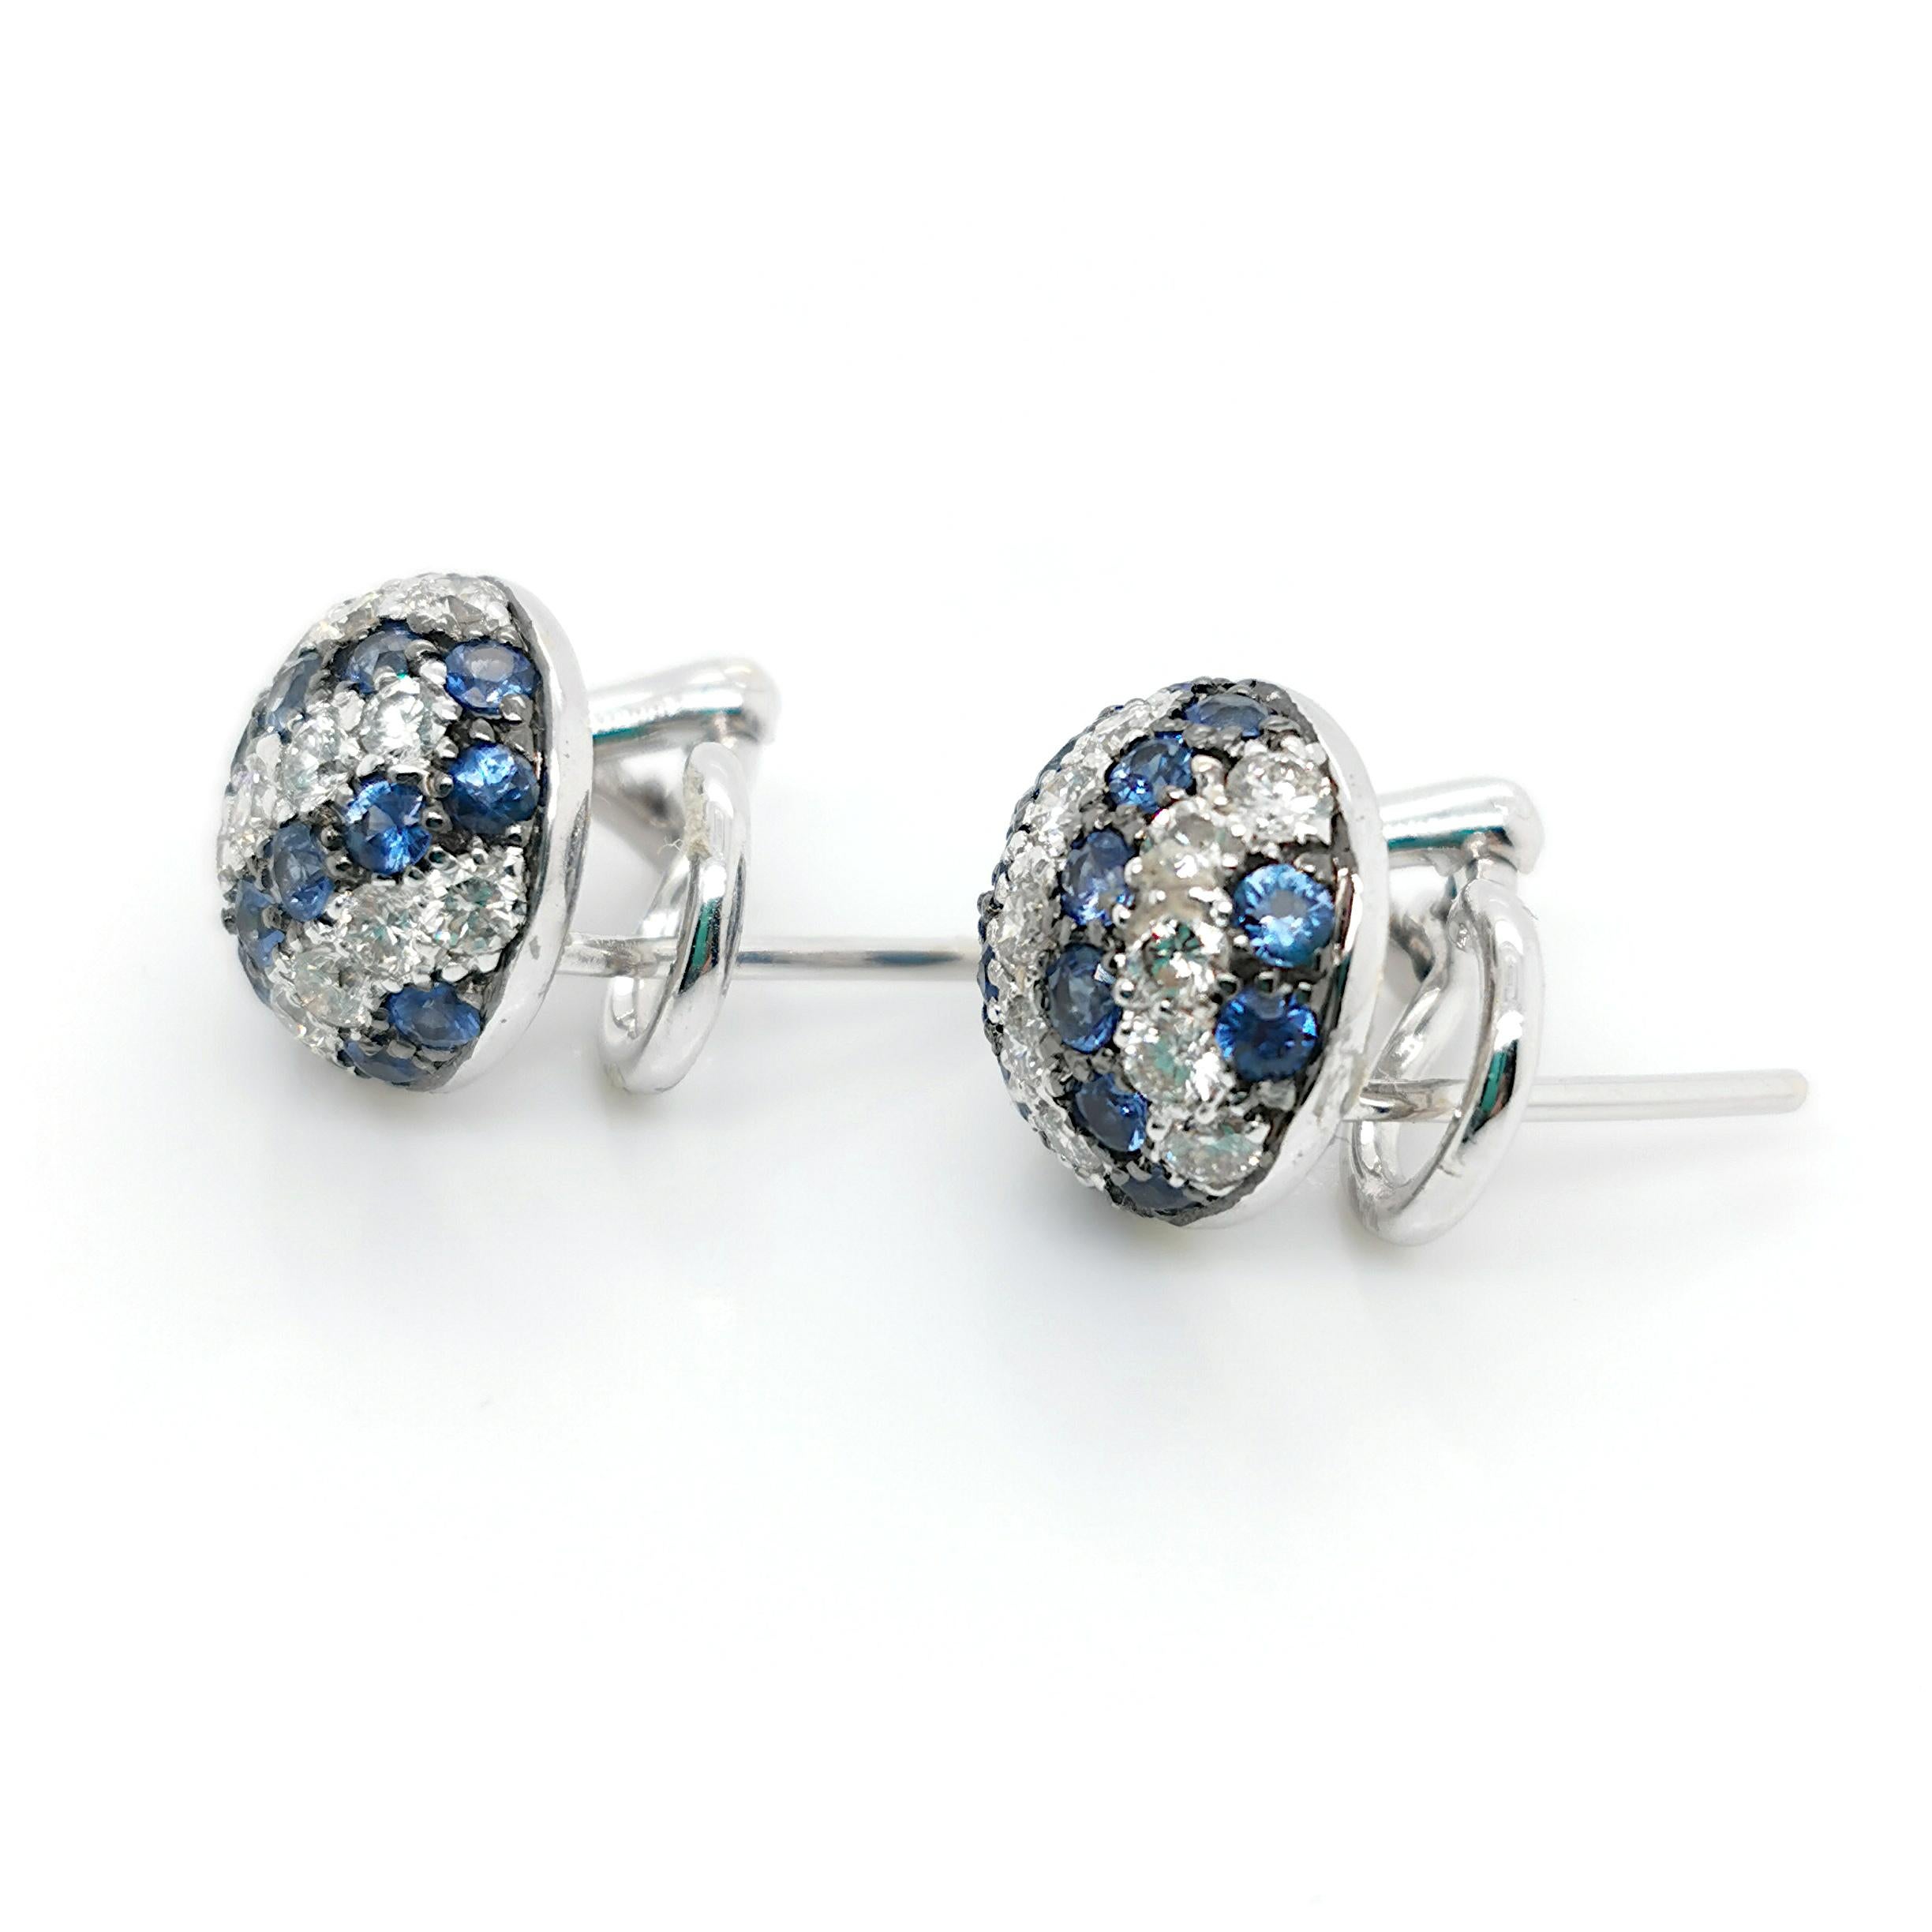 A pair of sapphire and diamond earrings, with a circular dome, set with alternating rows of round brilliant-cut diamonds and round faceted sapphires, mounted in 18ct white gold, with post and clip fittings. Estimated total diamond weight 1.00ct.